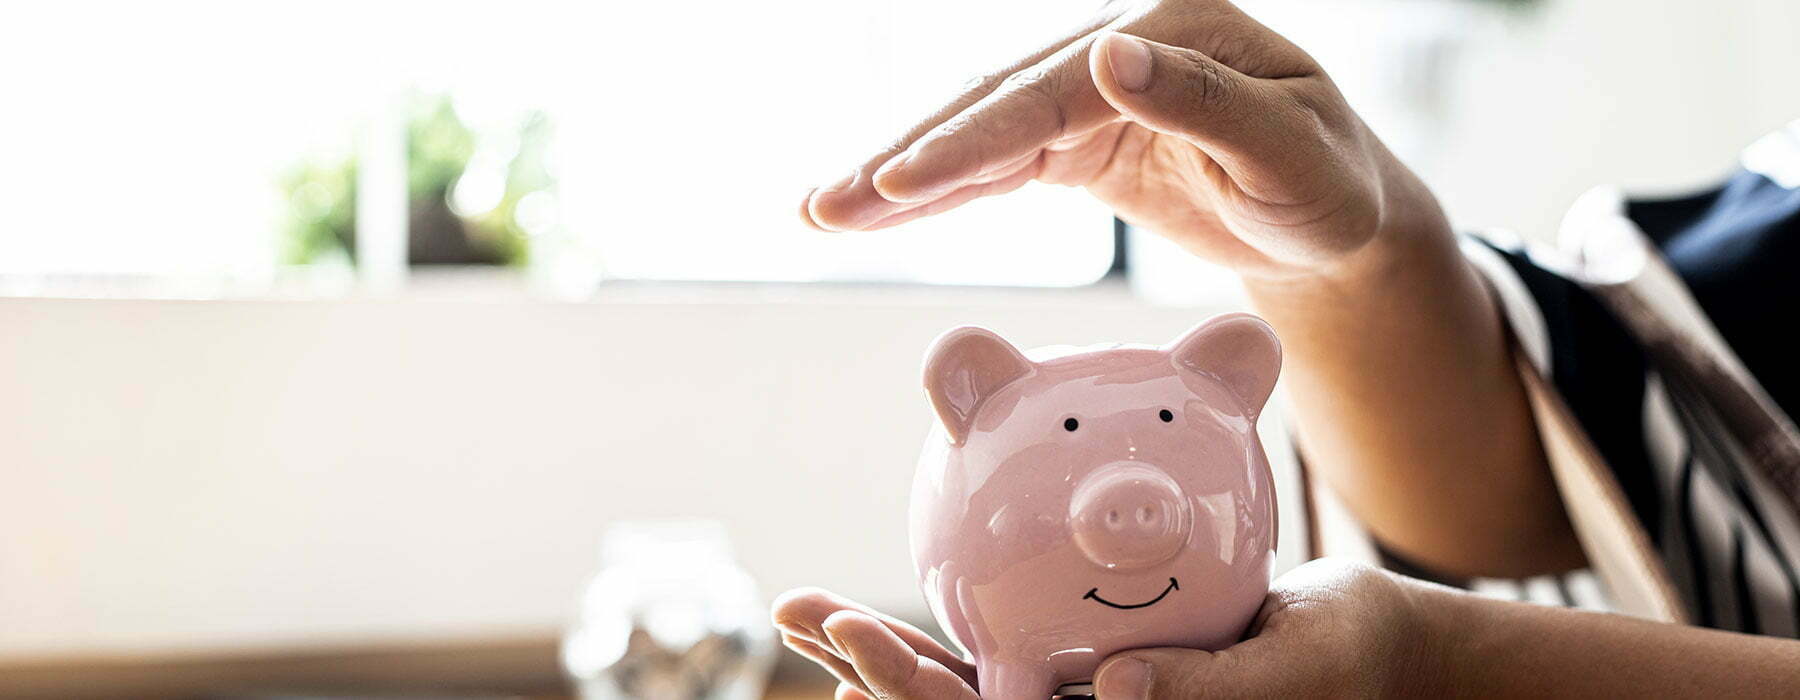 A person holding and putting a hand over a piggy bank to keep it safe